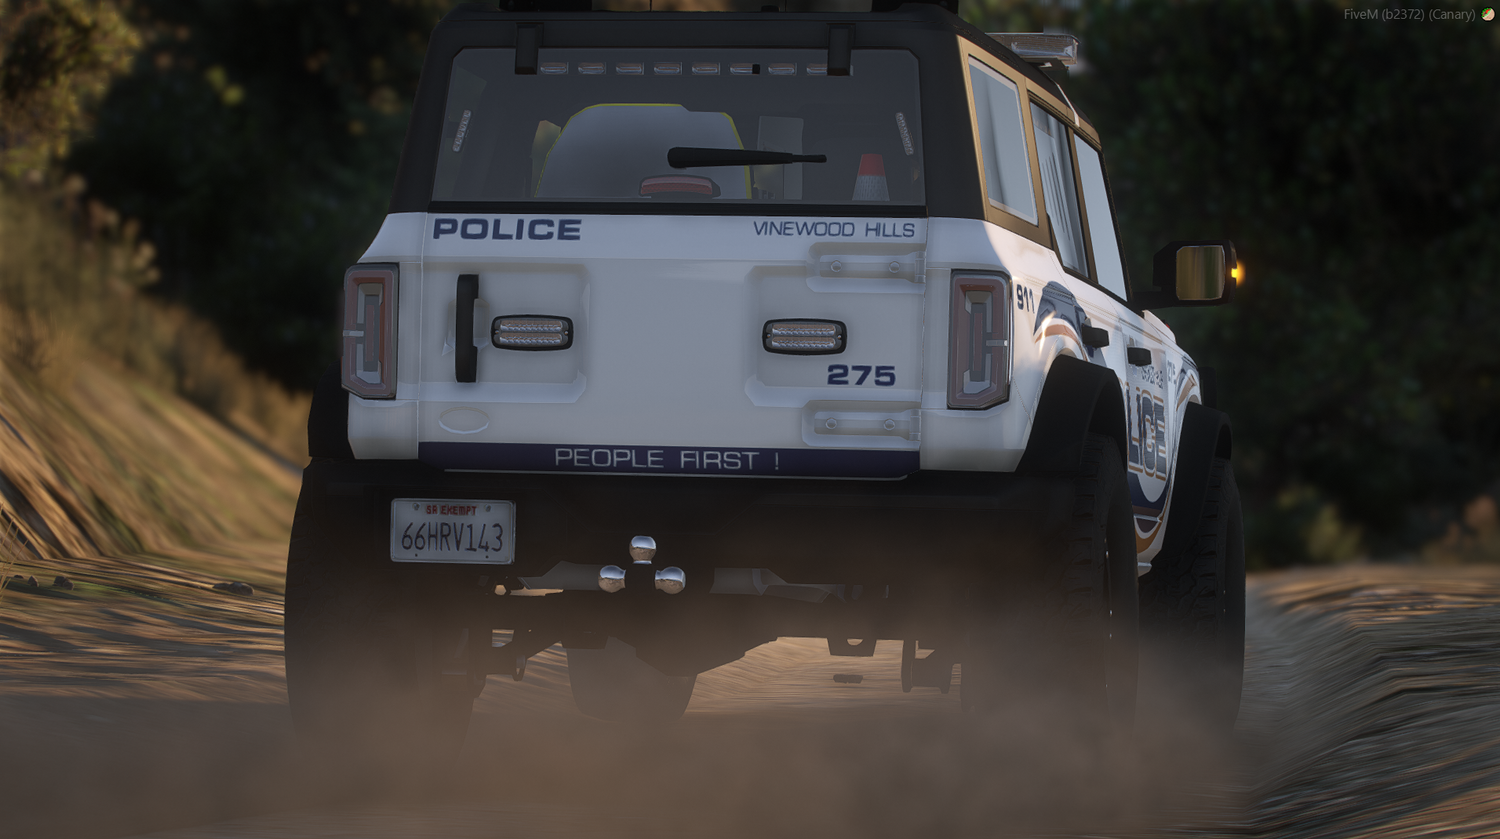 2021 Generic Police off-road vehicle